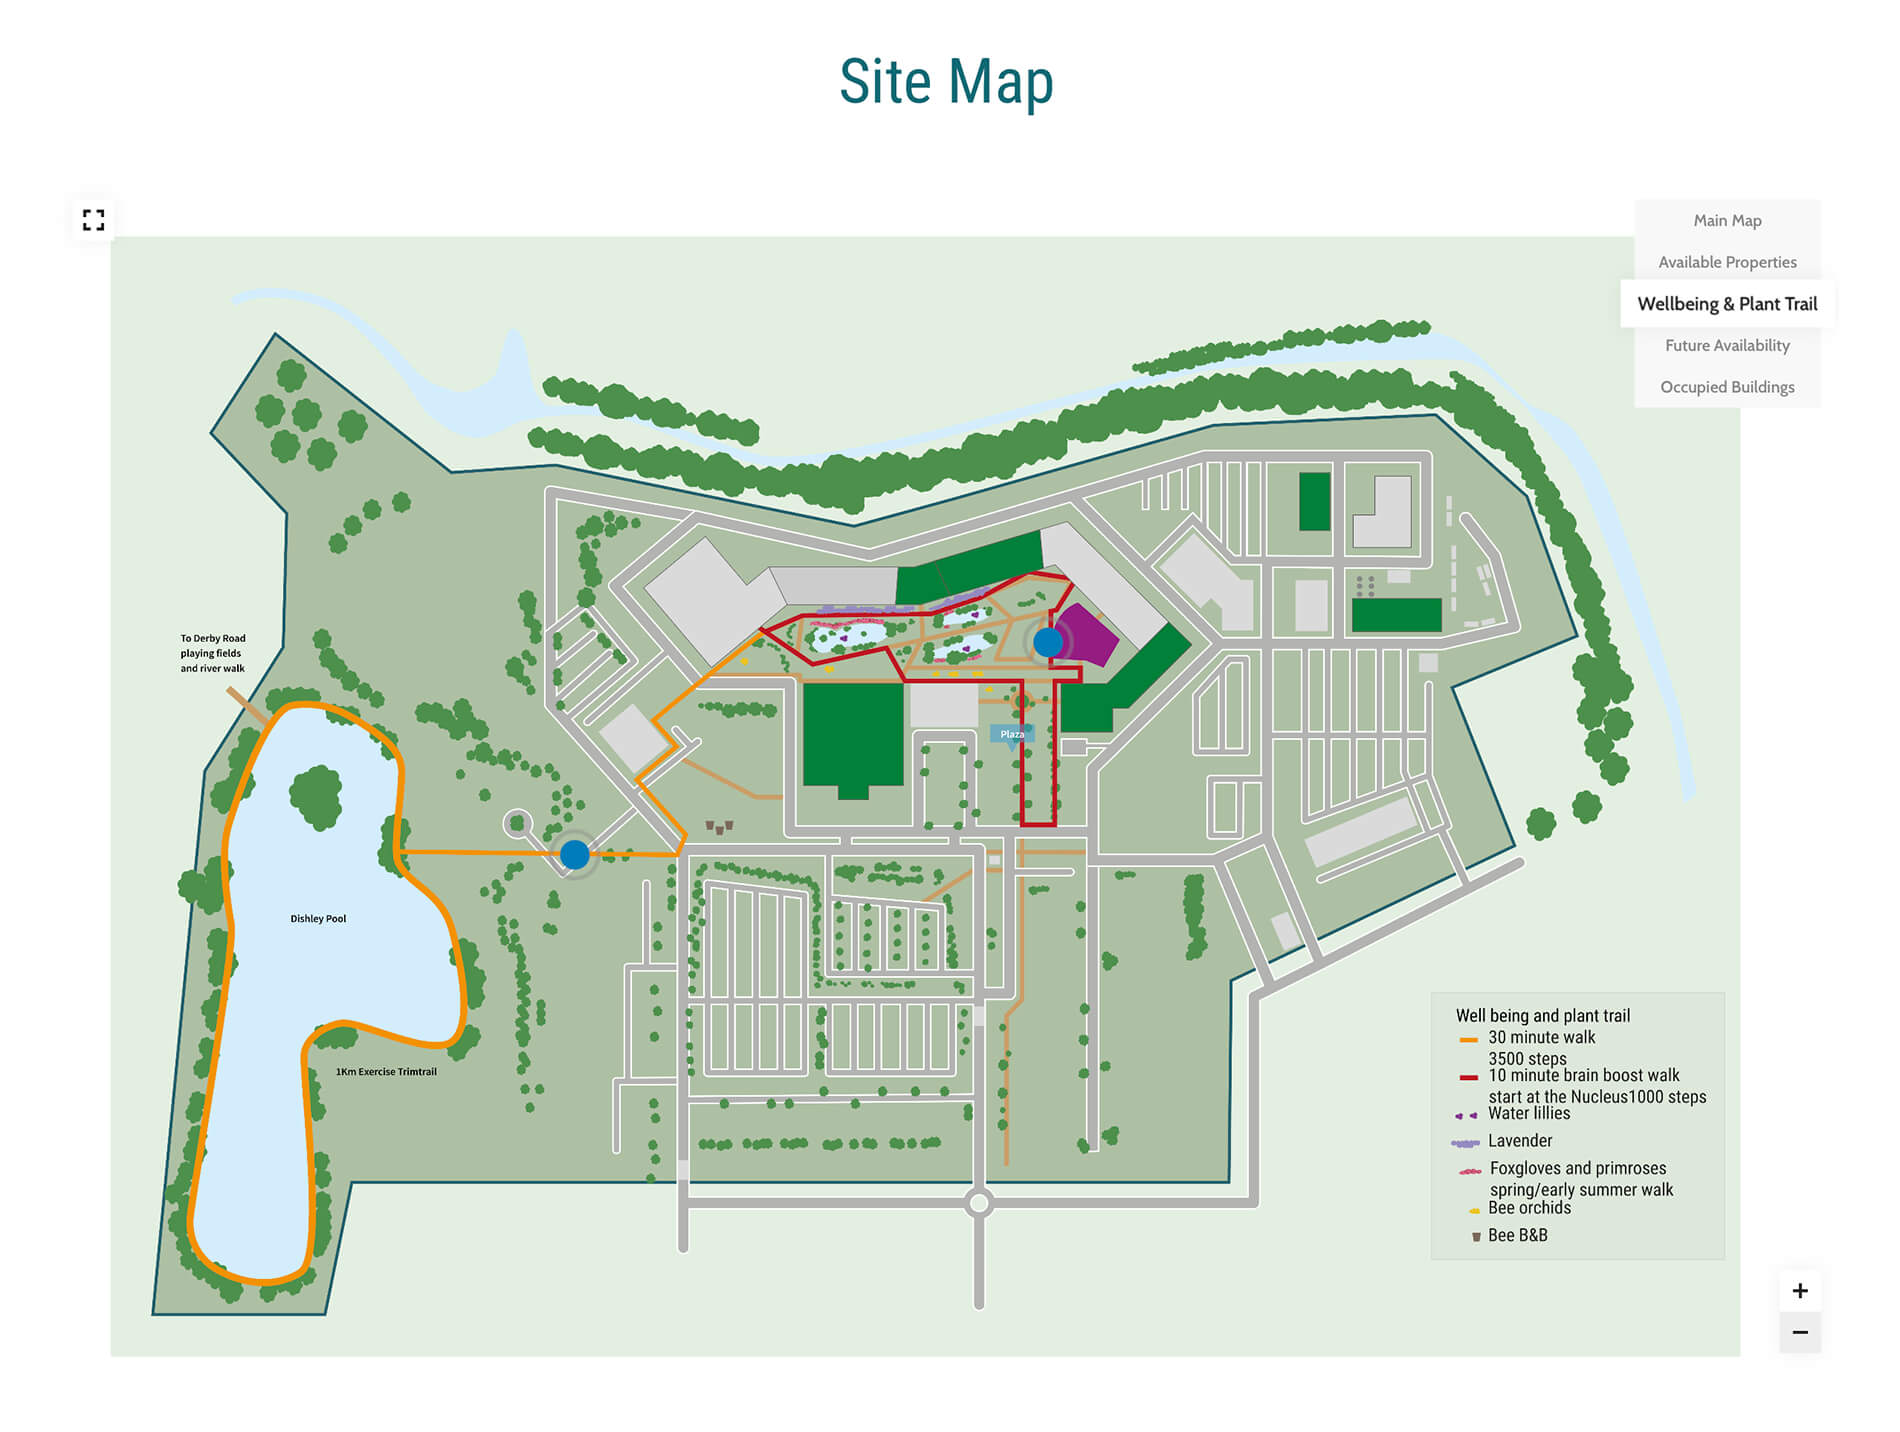 map 3 Charnwood Campus Well being and plant trail